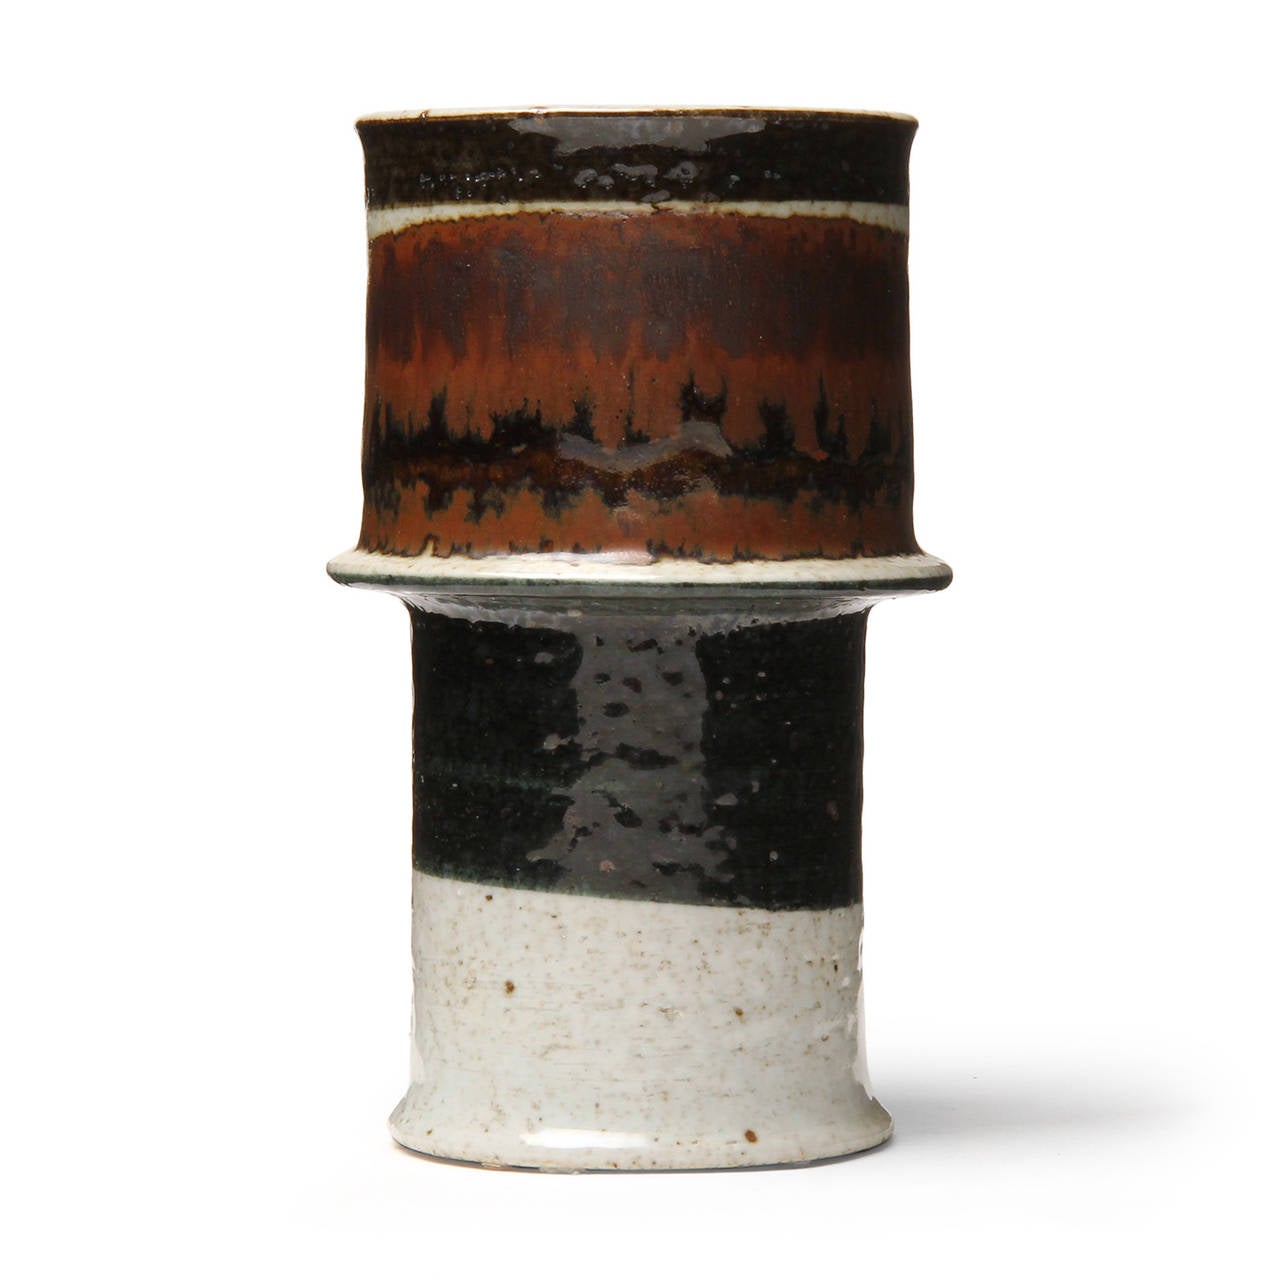 An impeccable and unique studio stoneware footed vase having a cylindrical and sculptural form decorated with expressive earth toned glazed bands of color.